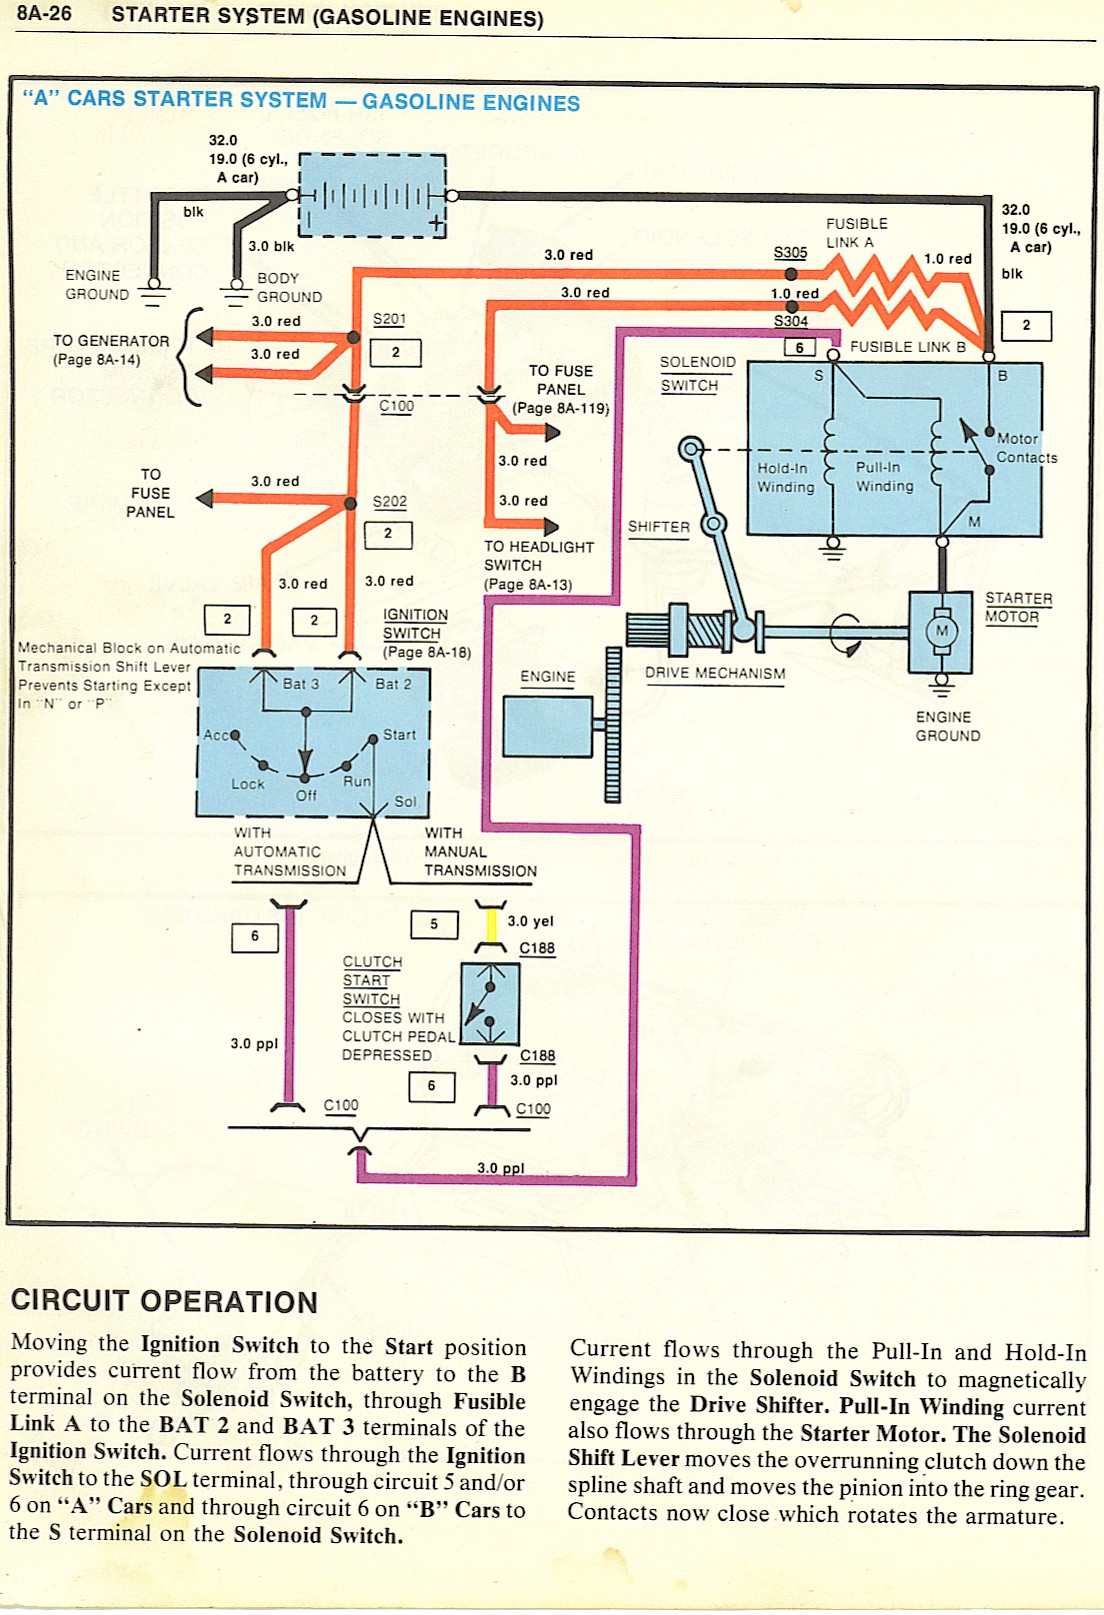 How many wires run down to the starter | GBodyForum - 1978-1988 General